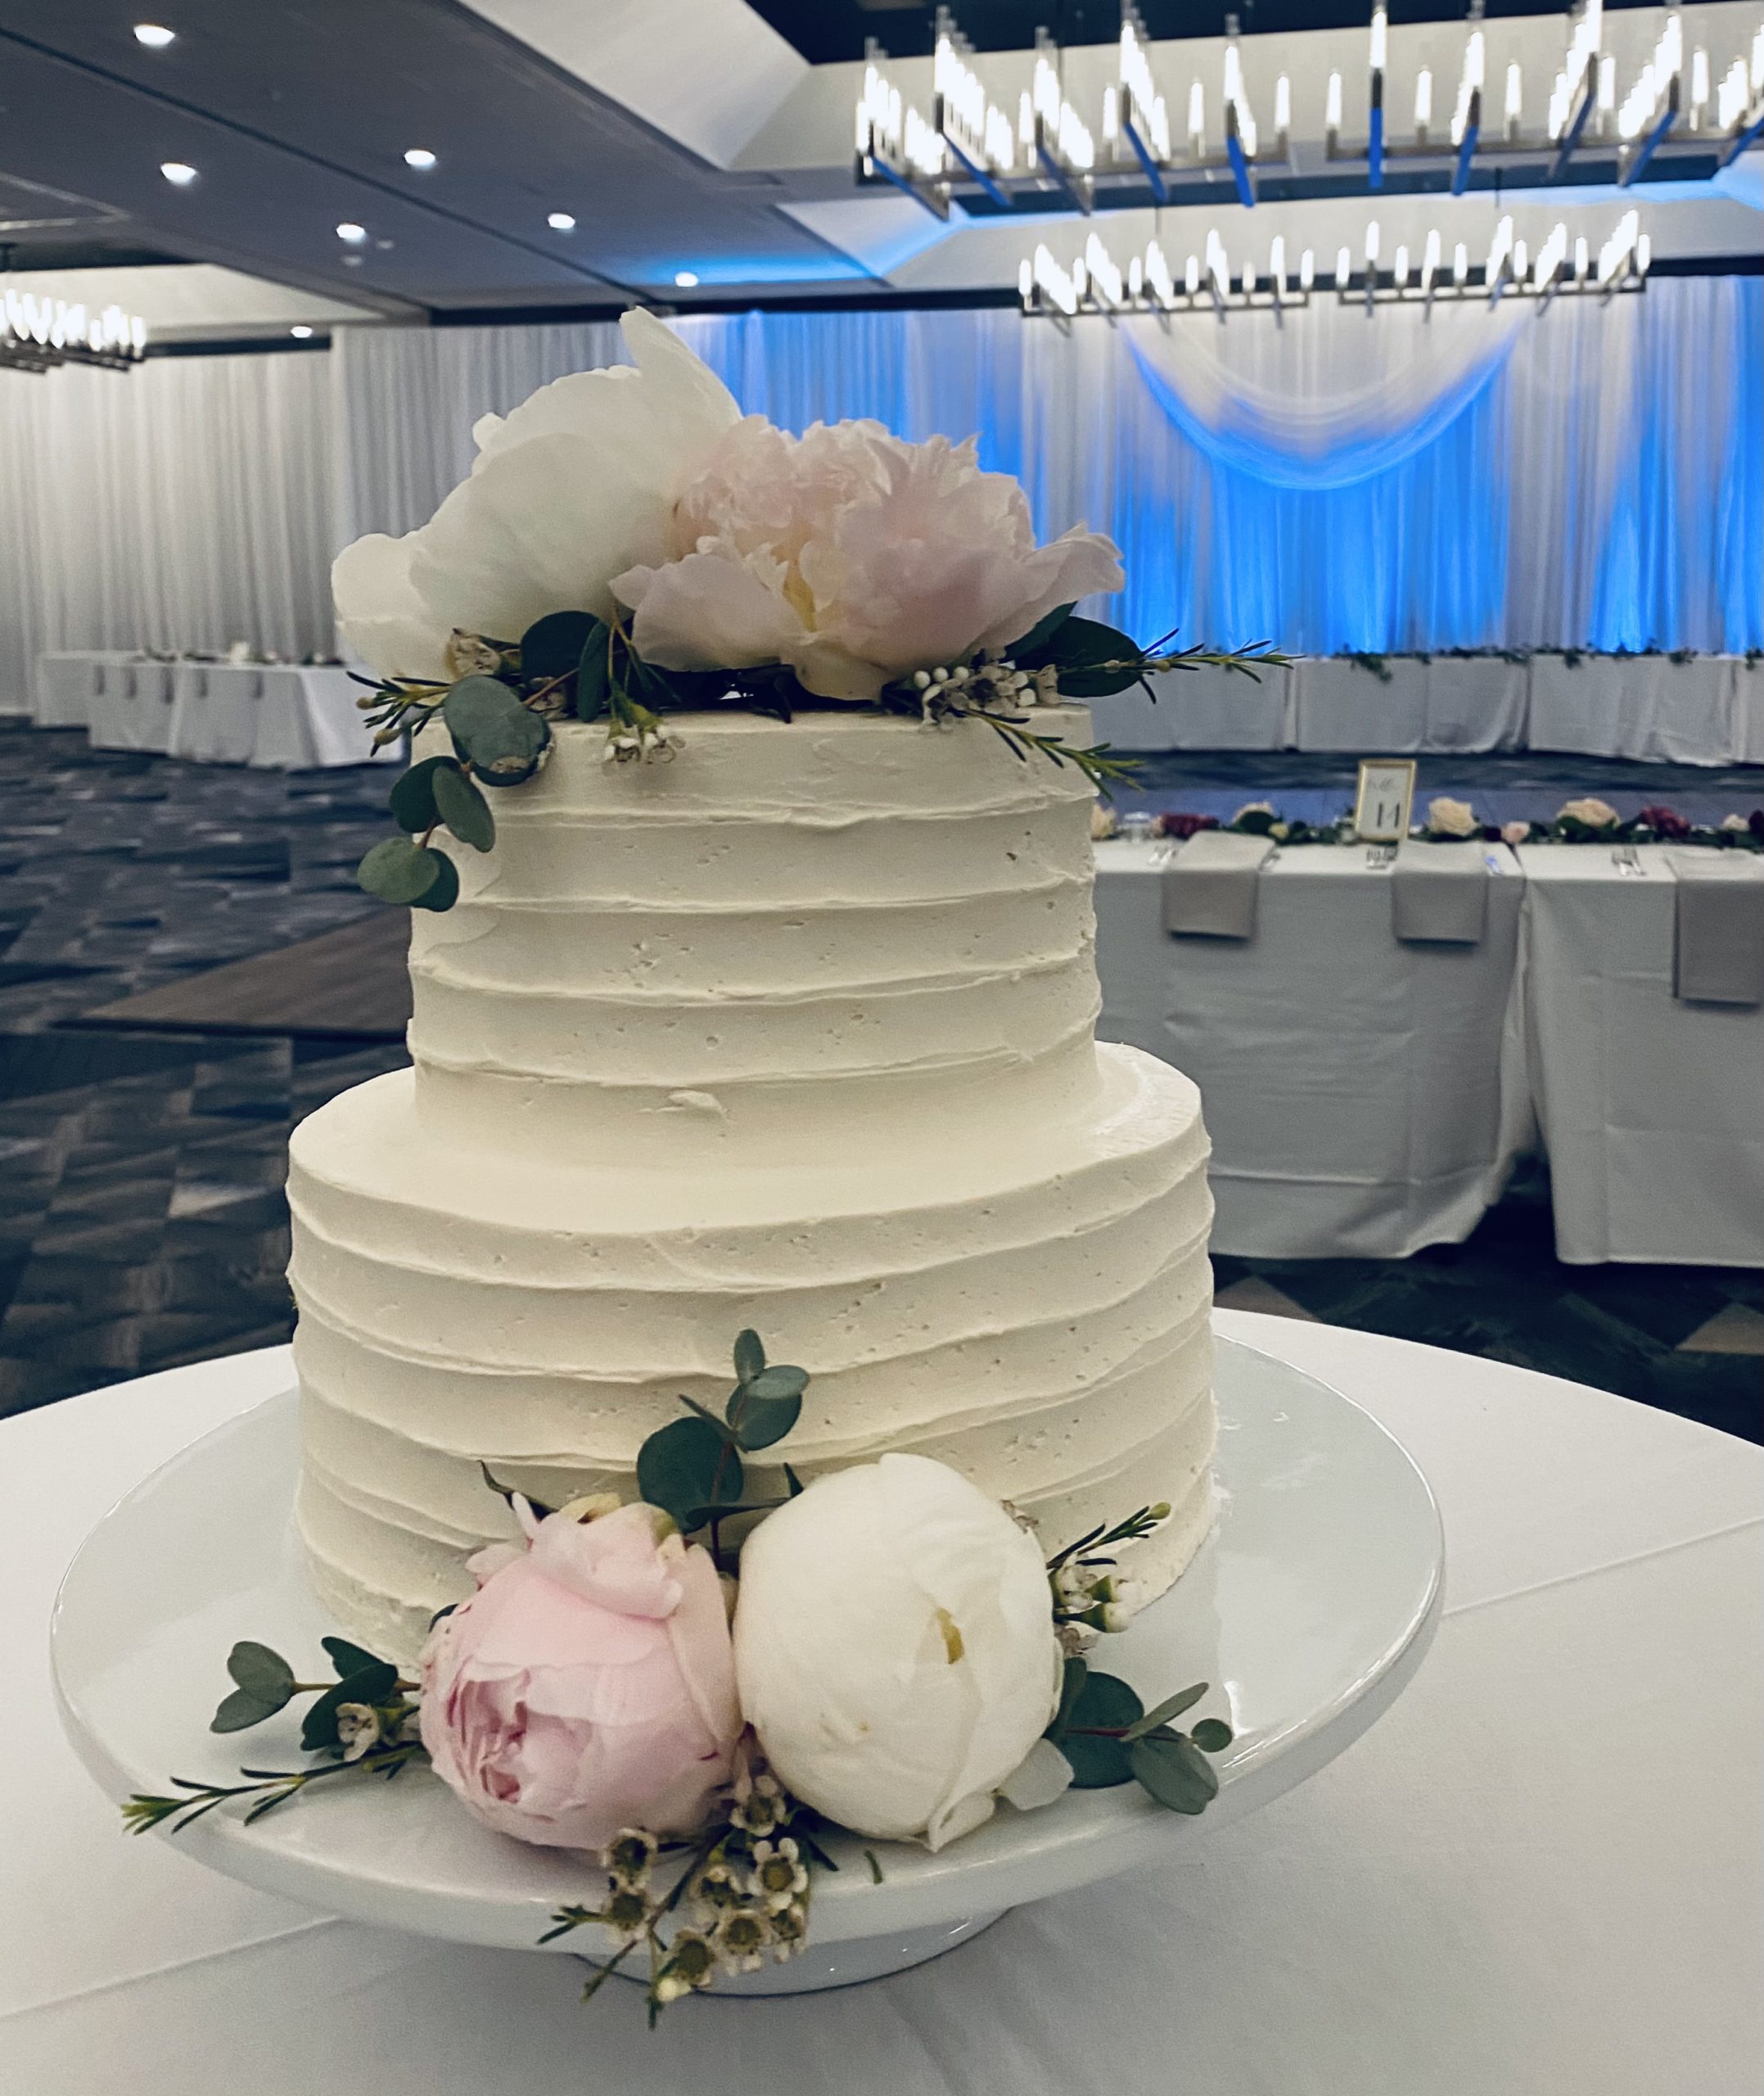 A beautiful 2-tier custom wedding cake with horizontal texture and live flowers from Village Patisserie in Toledo, Ohio